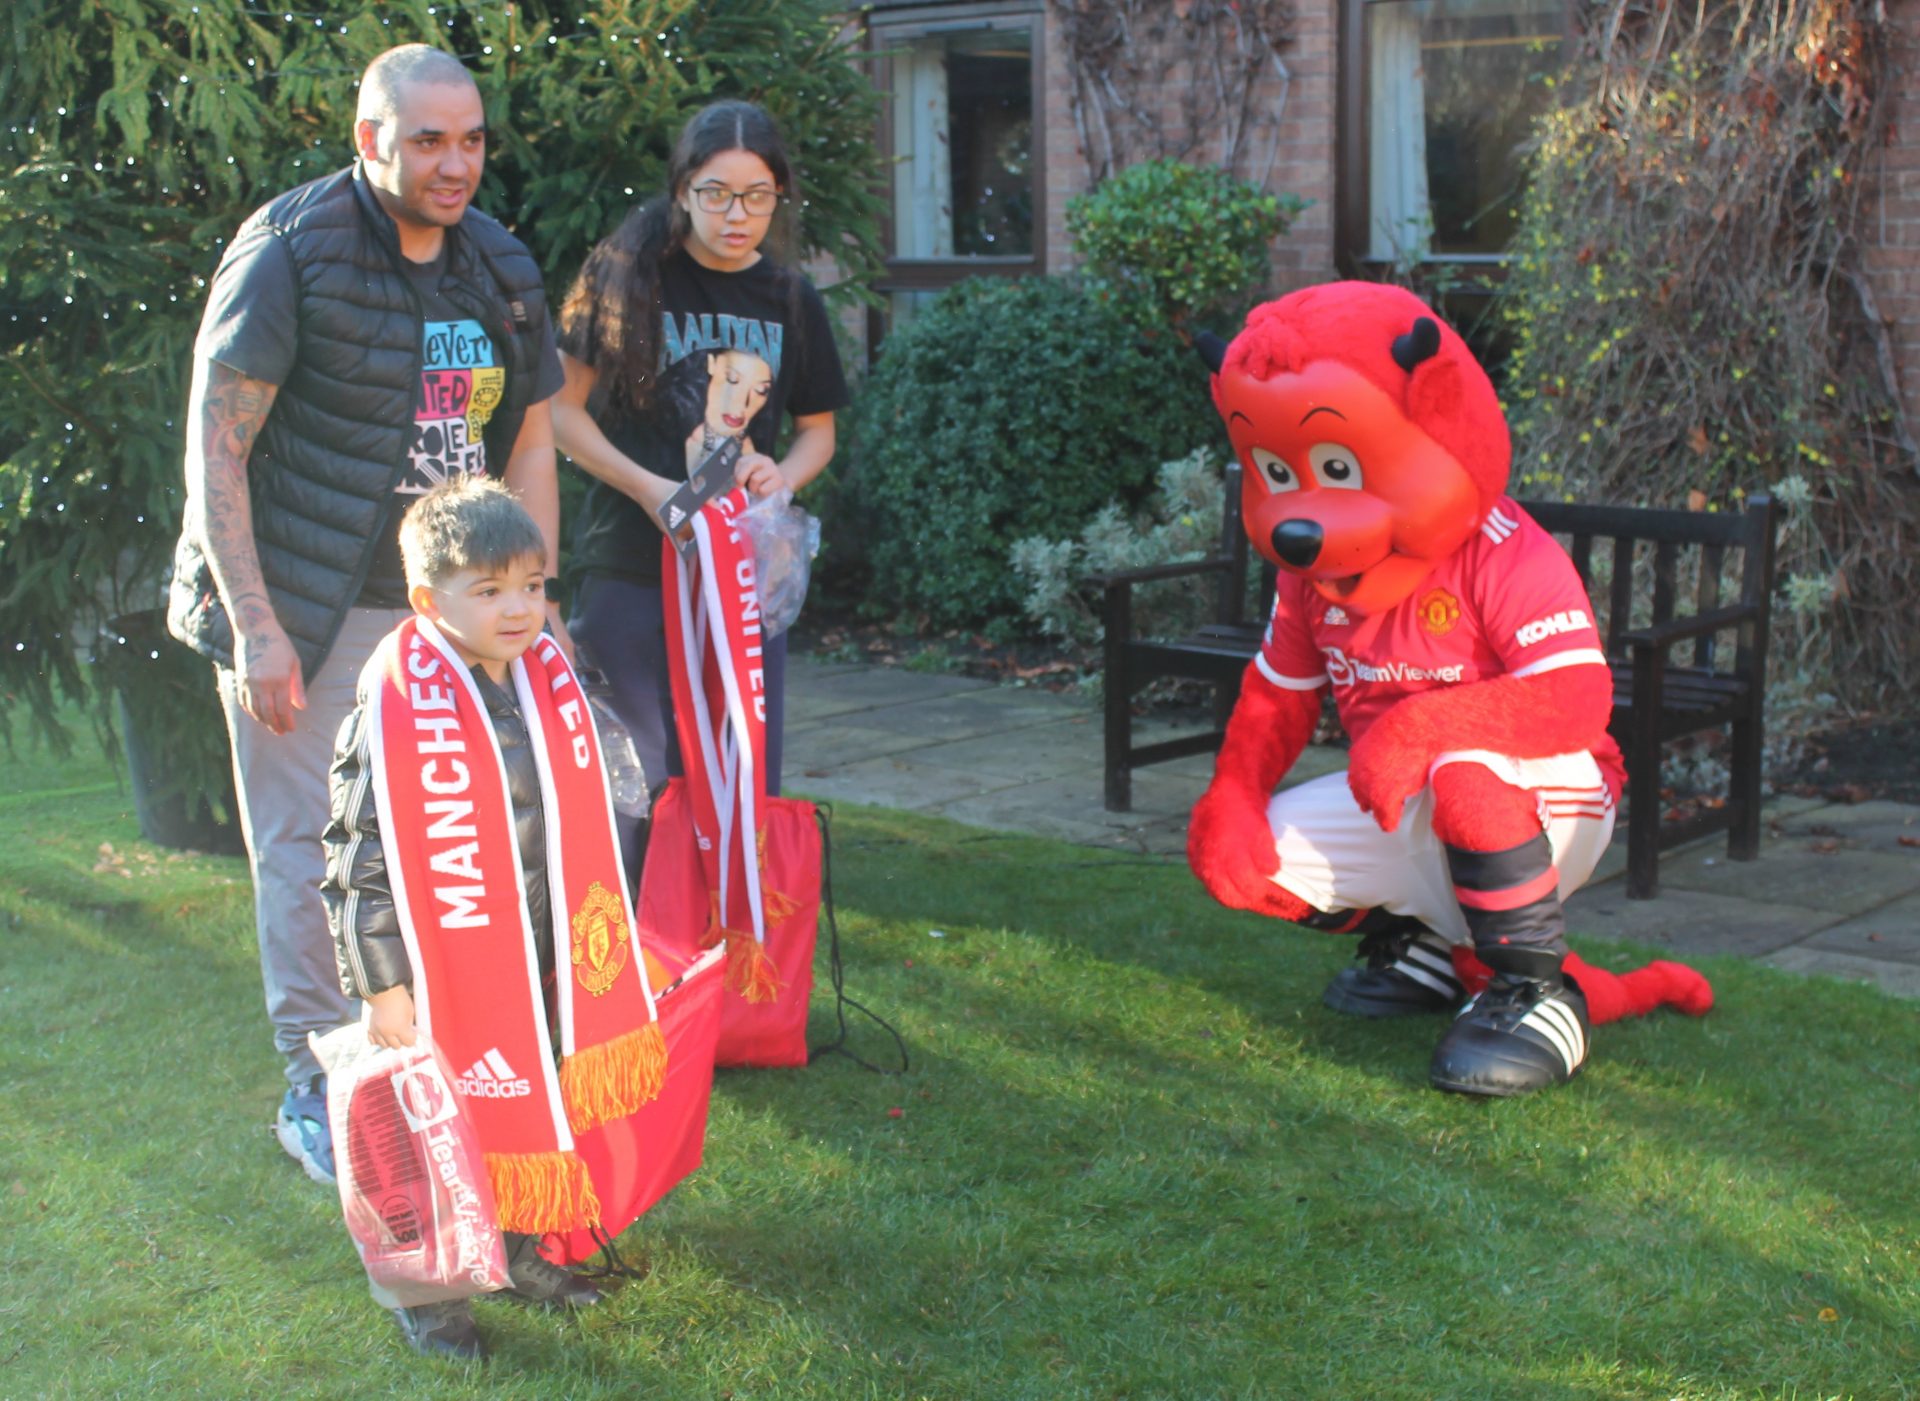 Family with Manchester United gifts and Fred the Red mascot